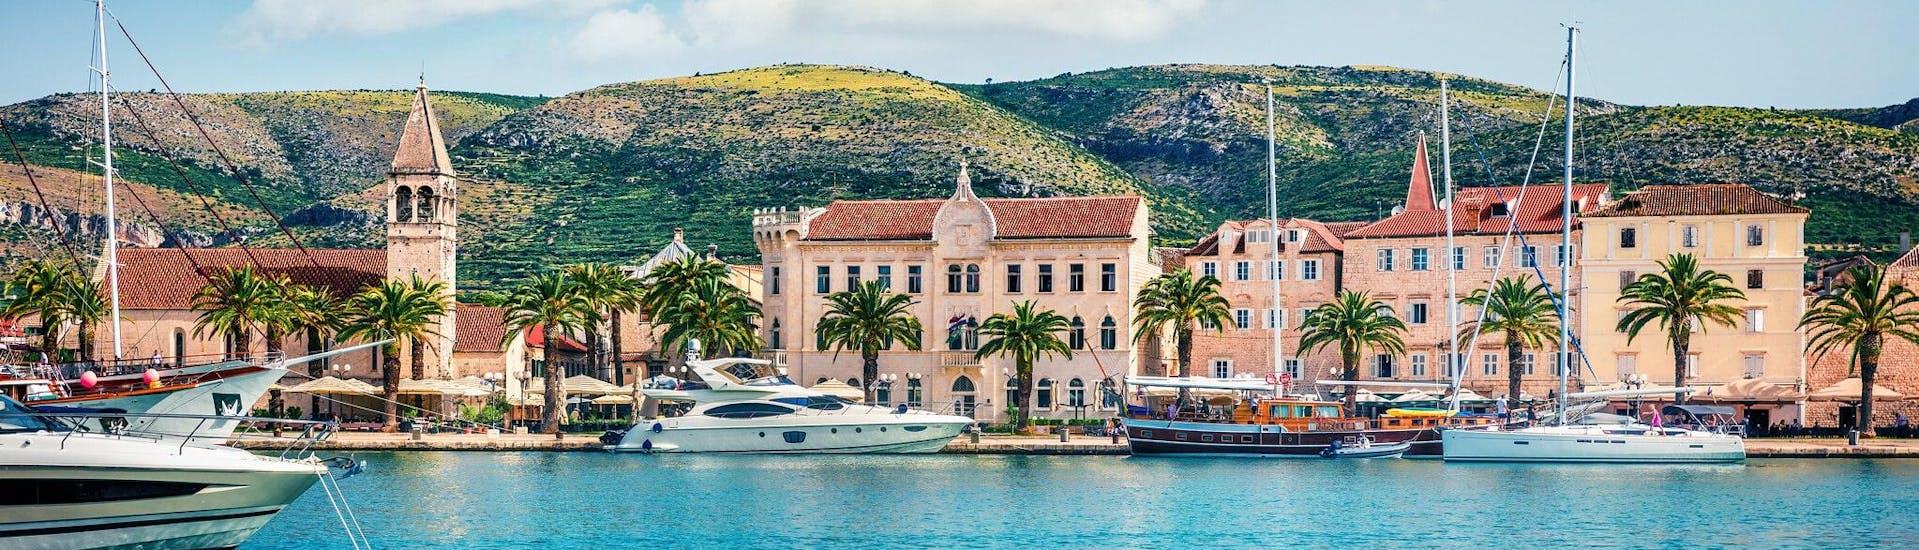 View of the port, which is an ideal starting point for a boat rental in Trogir.